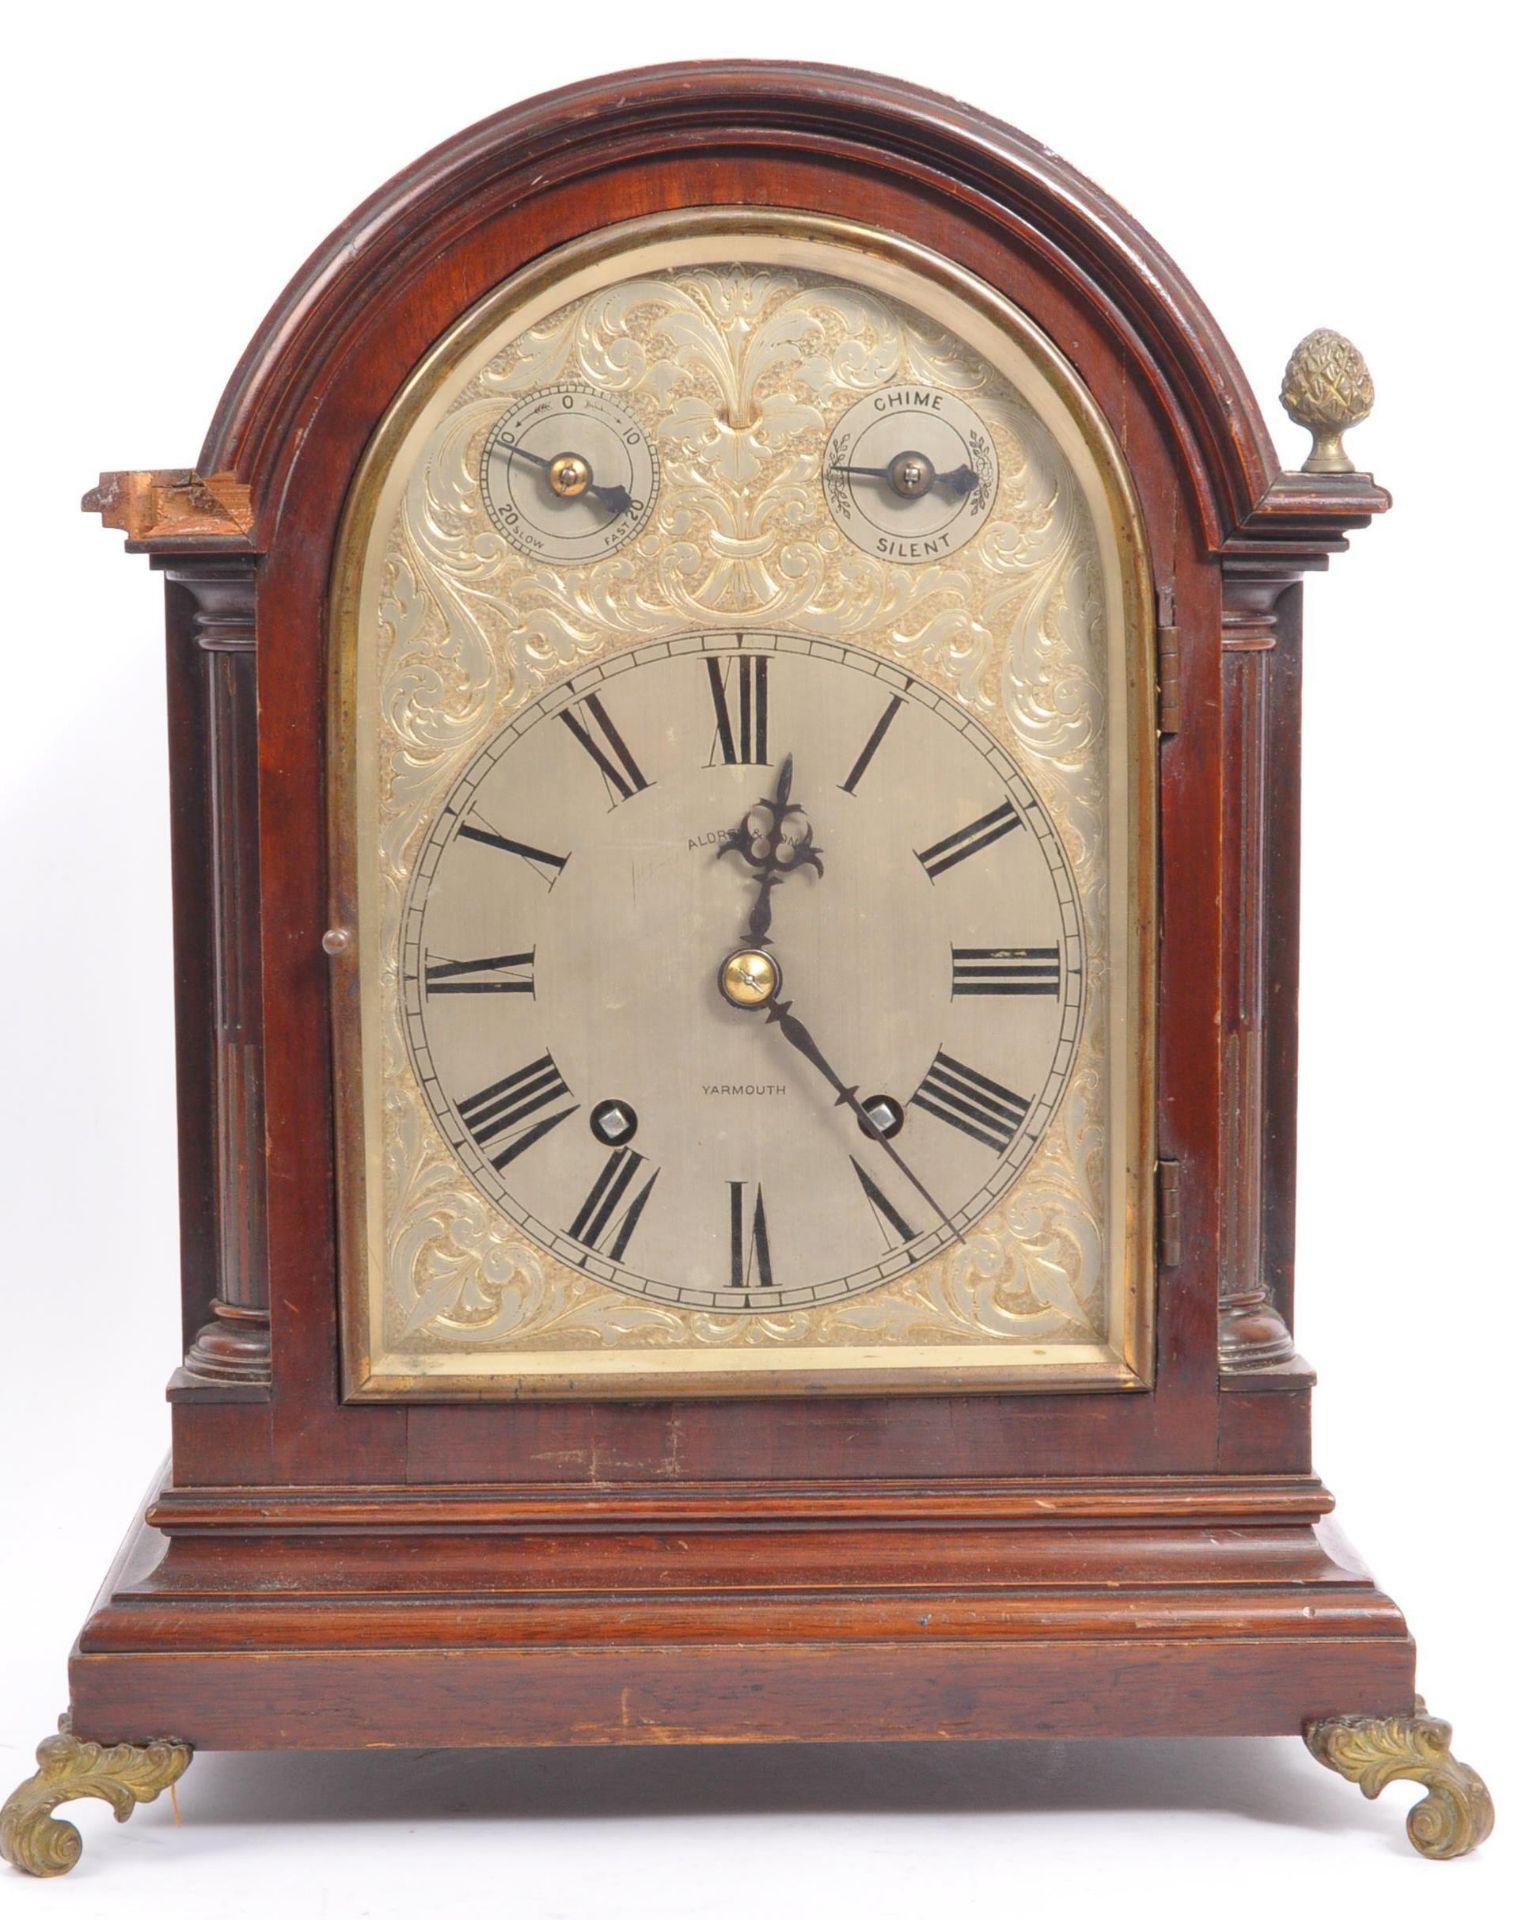 EARLY 20TH CENTURY ALDRED & SONS BRACKET CLOCK